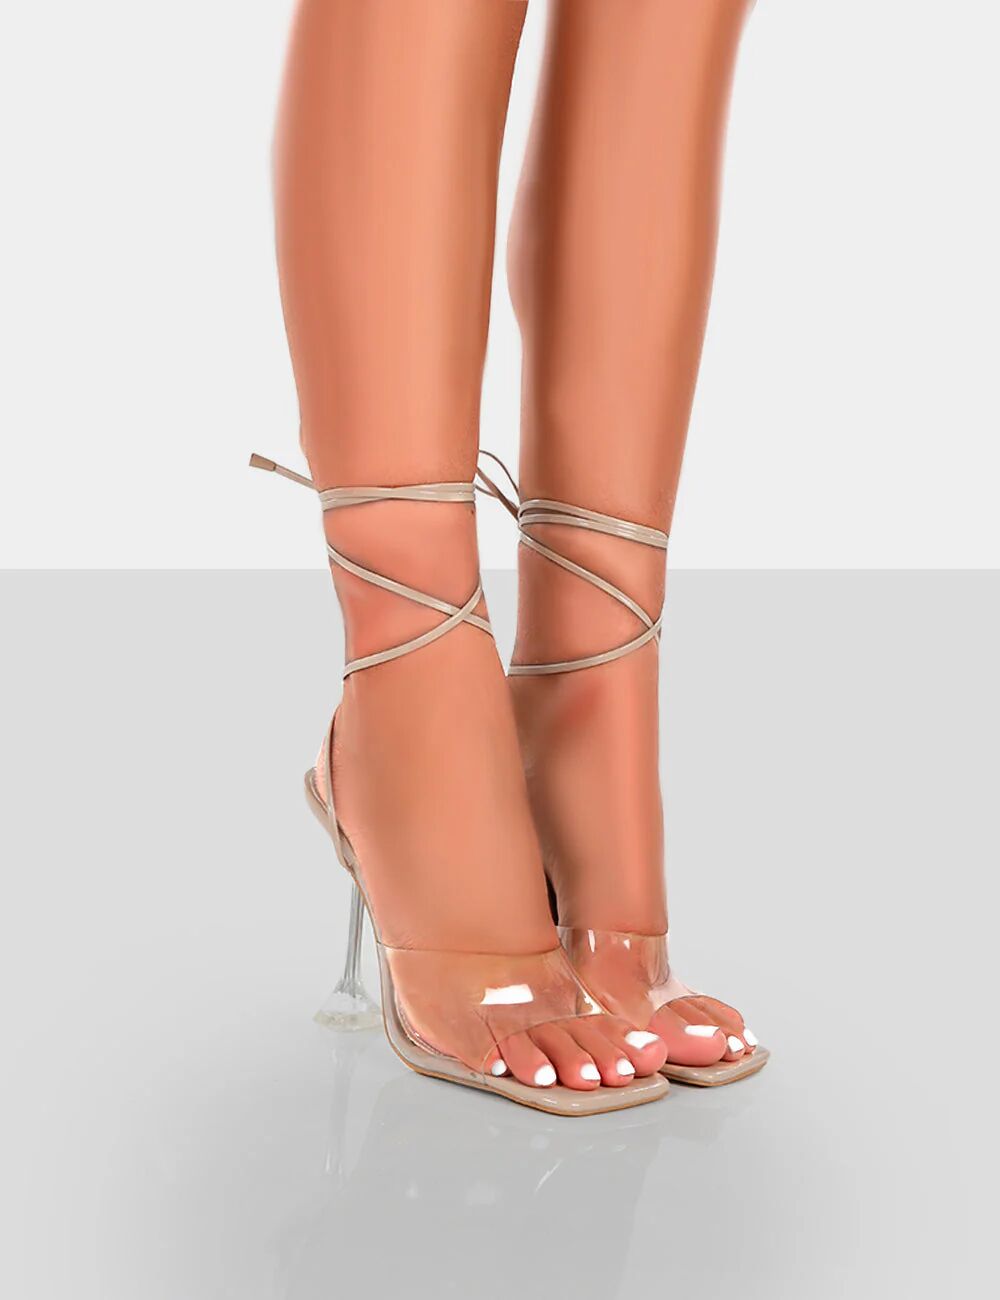 Public Desire US Bly Nude Patent Perspex Cake Stand Lace Up Square Toe Heels - female - US 9 / UK 7 / EU 40 - Size: 6744279908483